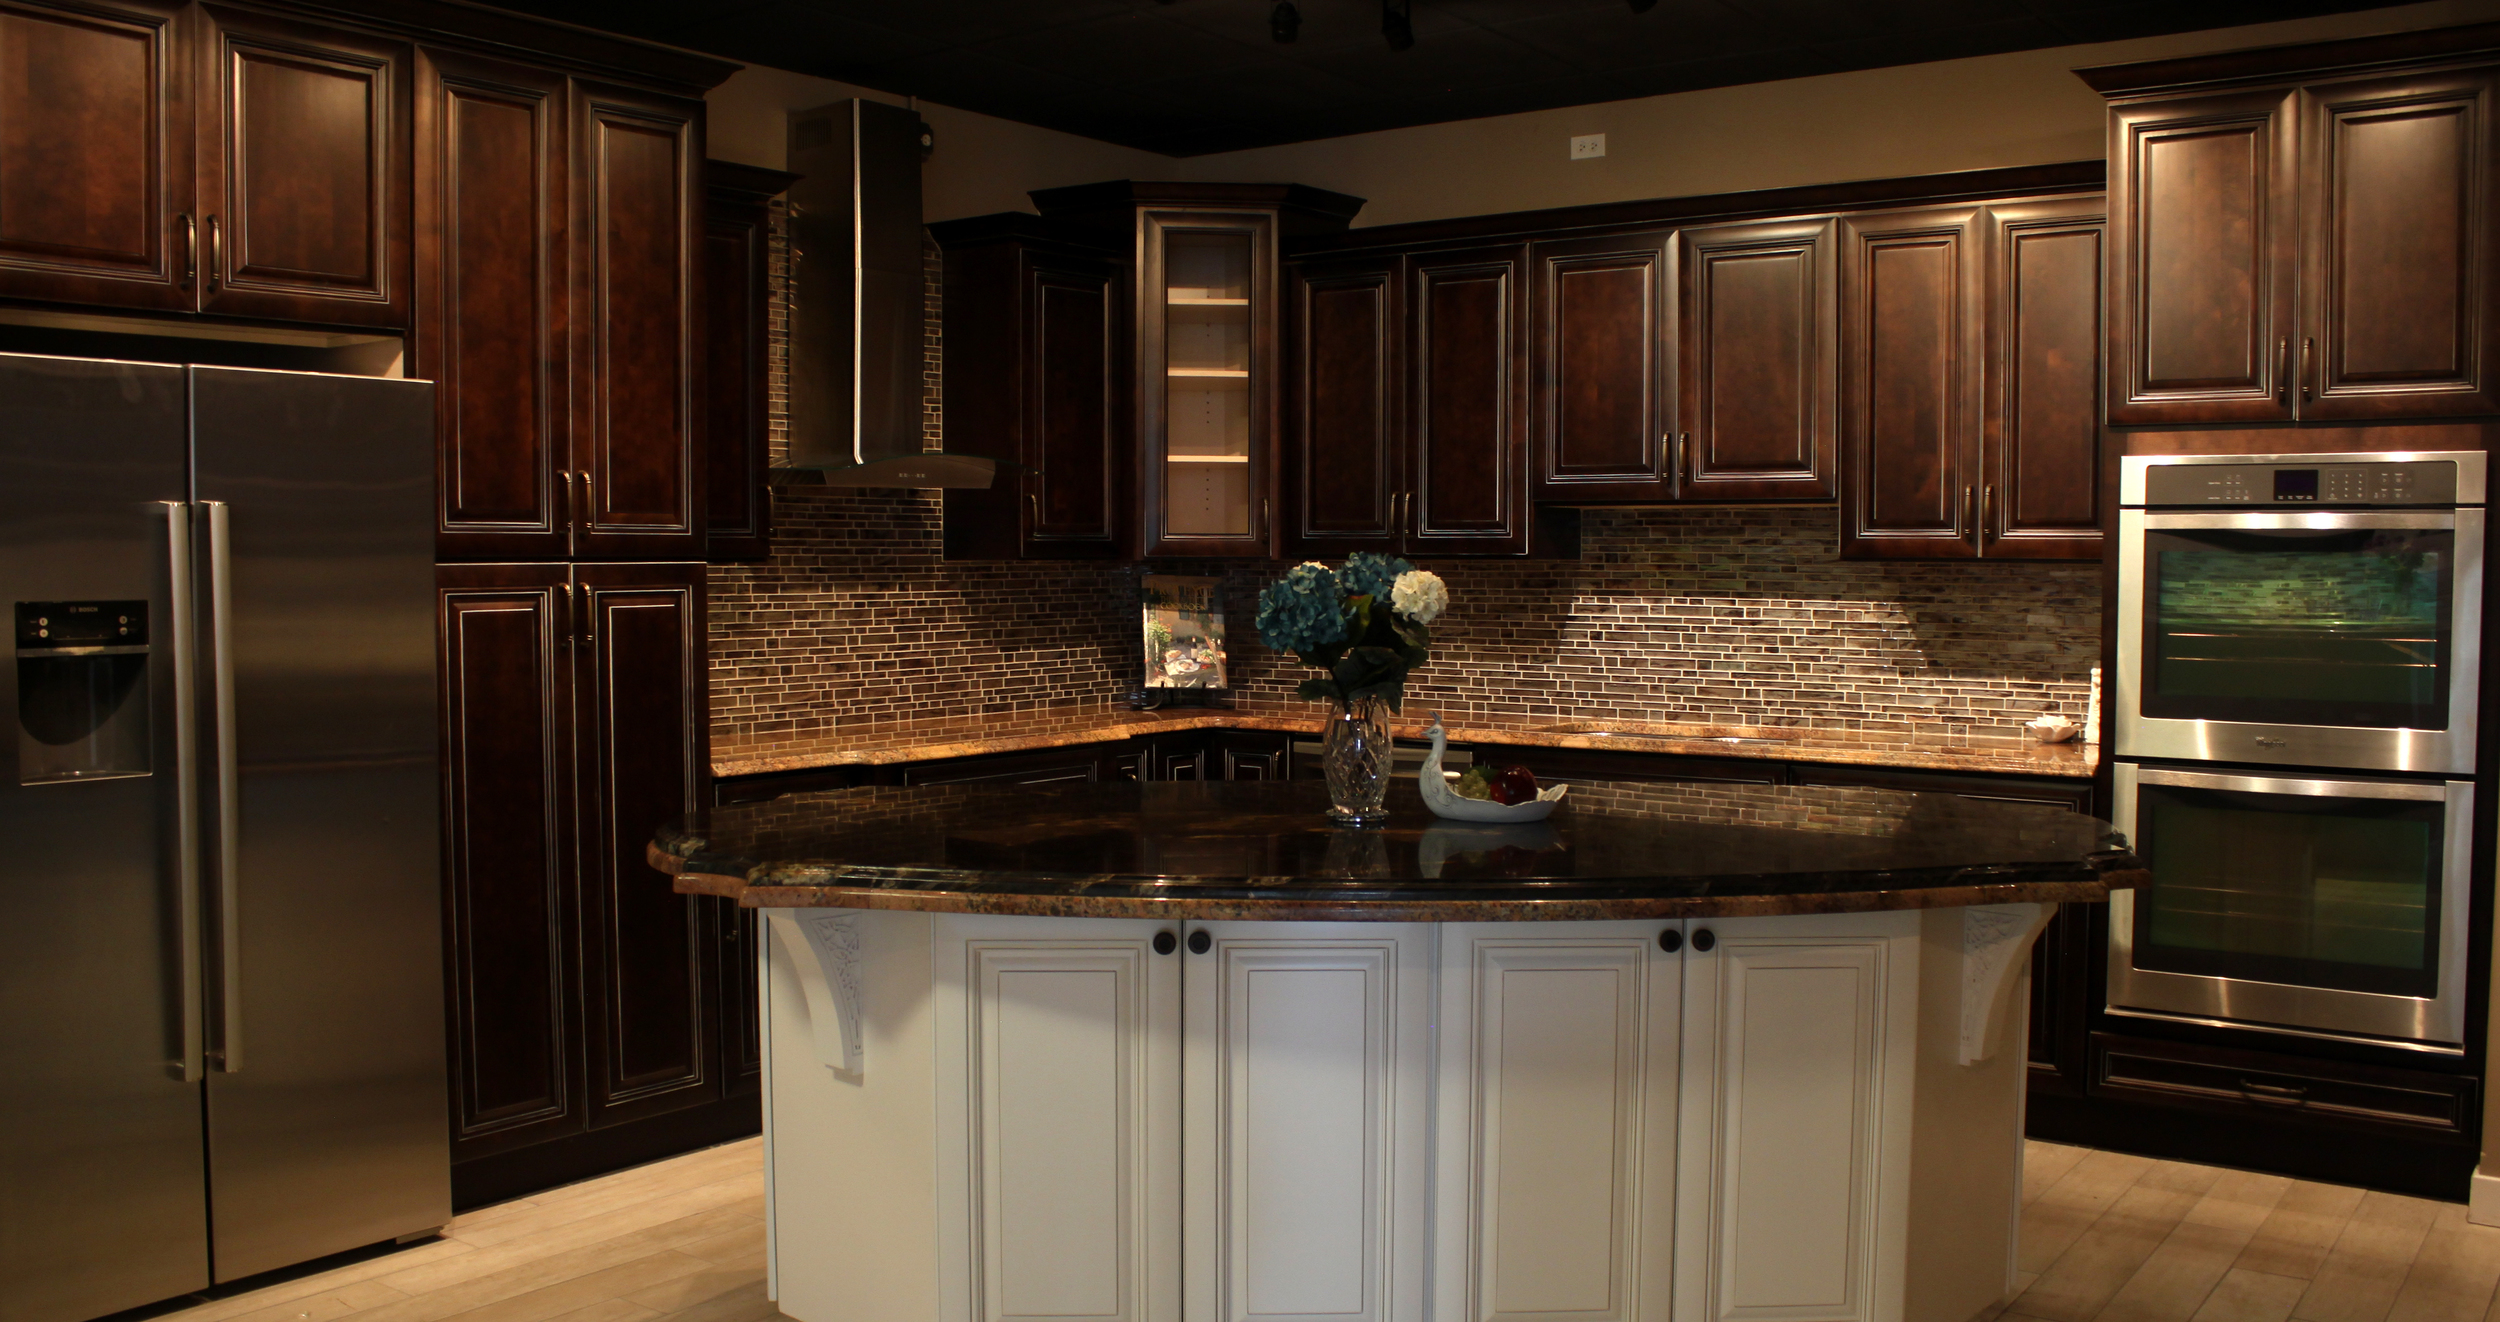 Glenview Kitchen Cabinets Sinks And Countertops Rock Counter,What Is A Marriage License Needed For